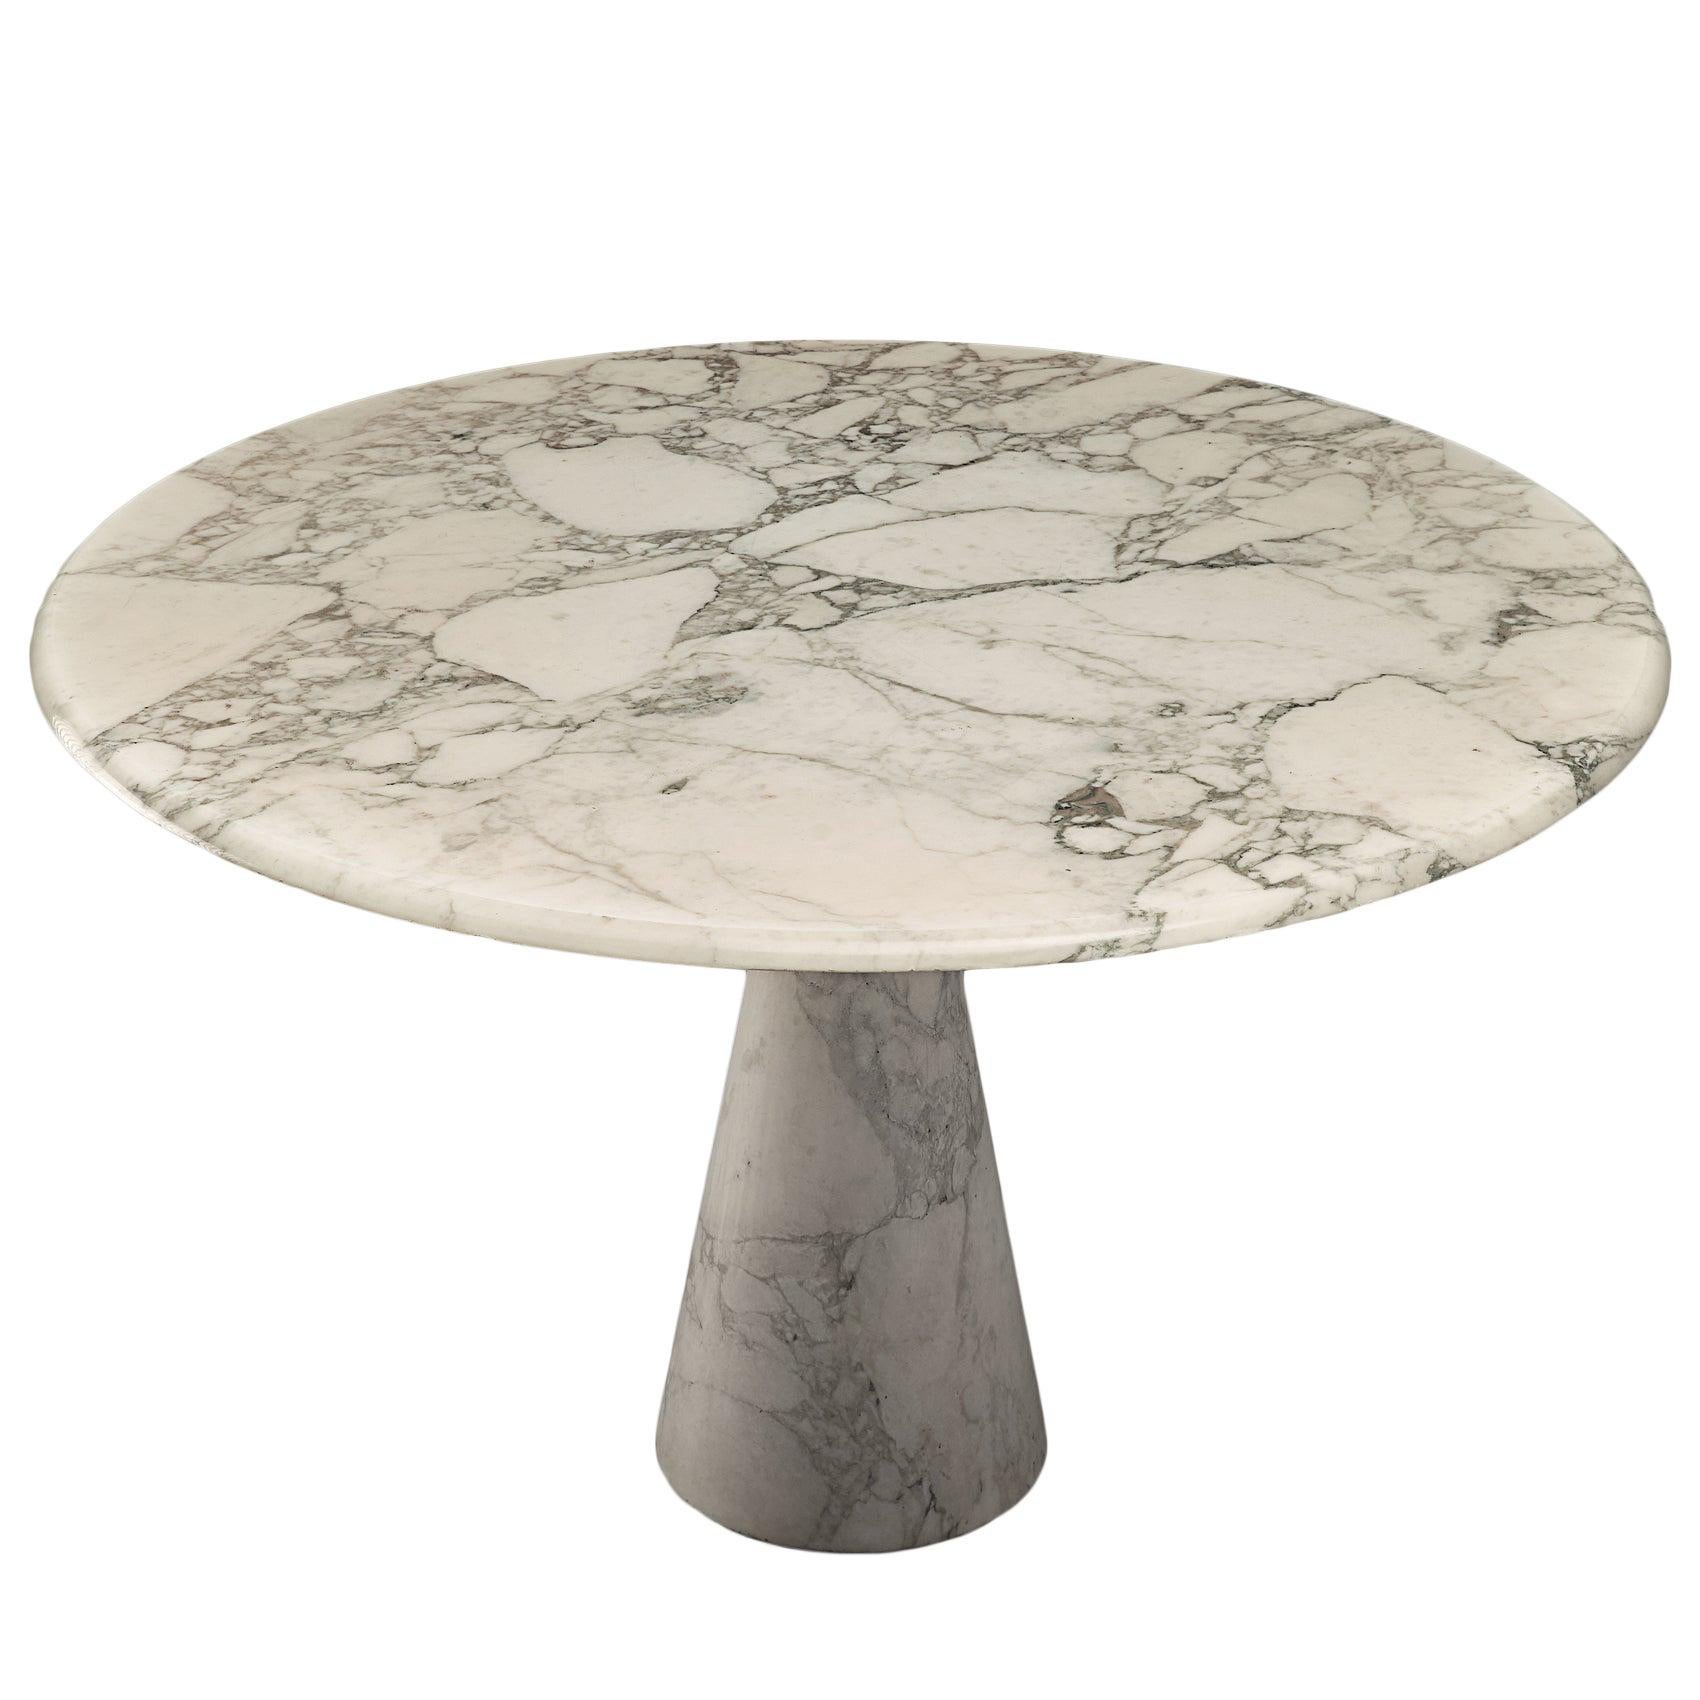 A. Mangiarotti Round Pedestal Dining Table in White Marble